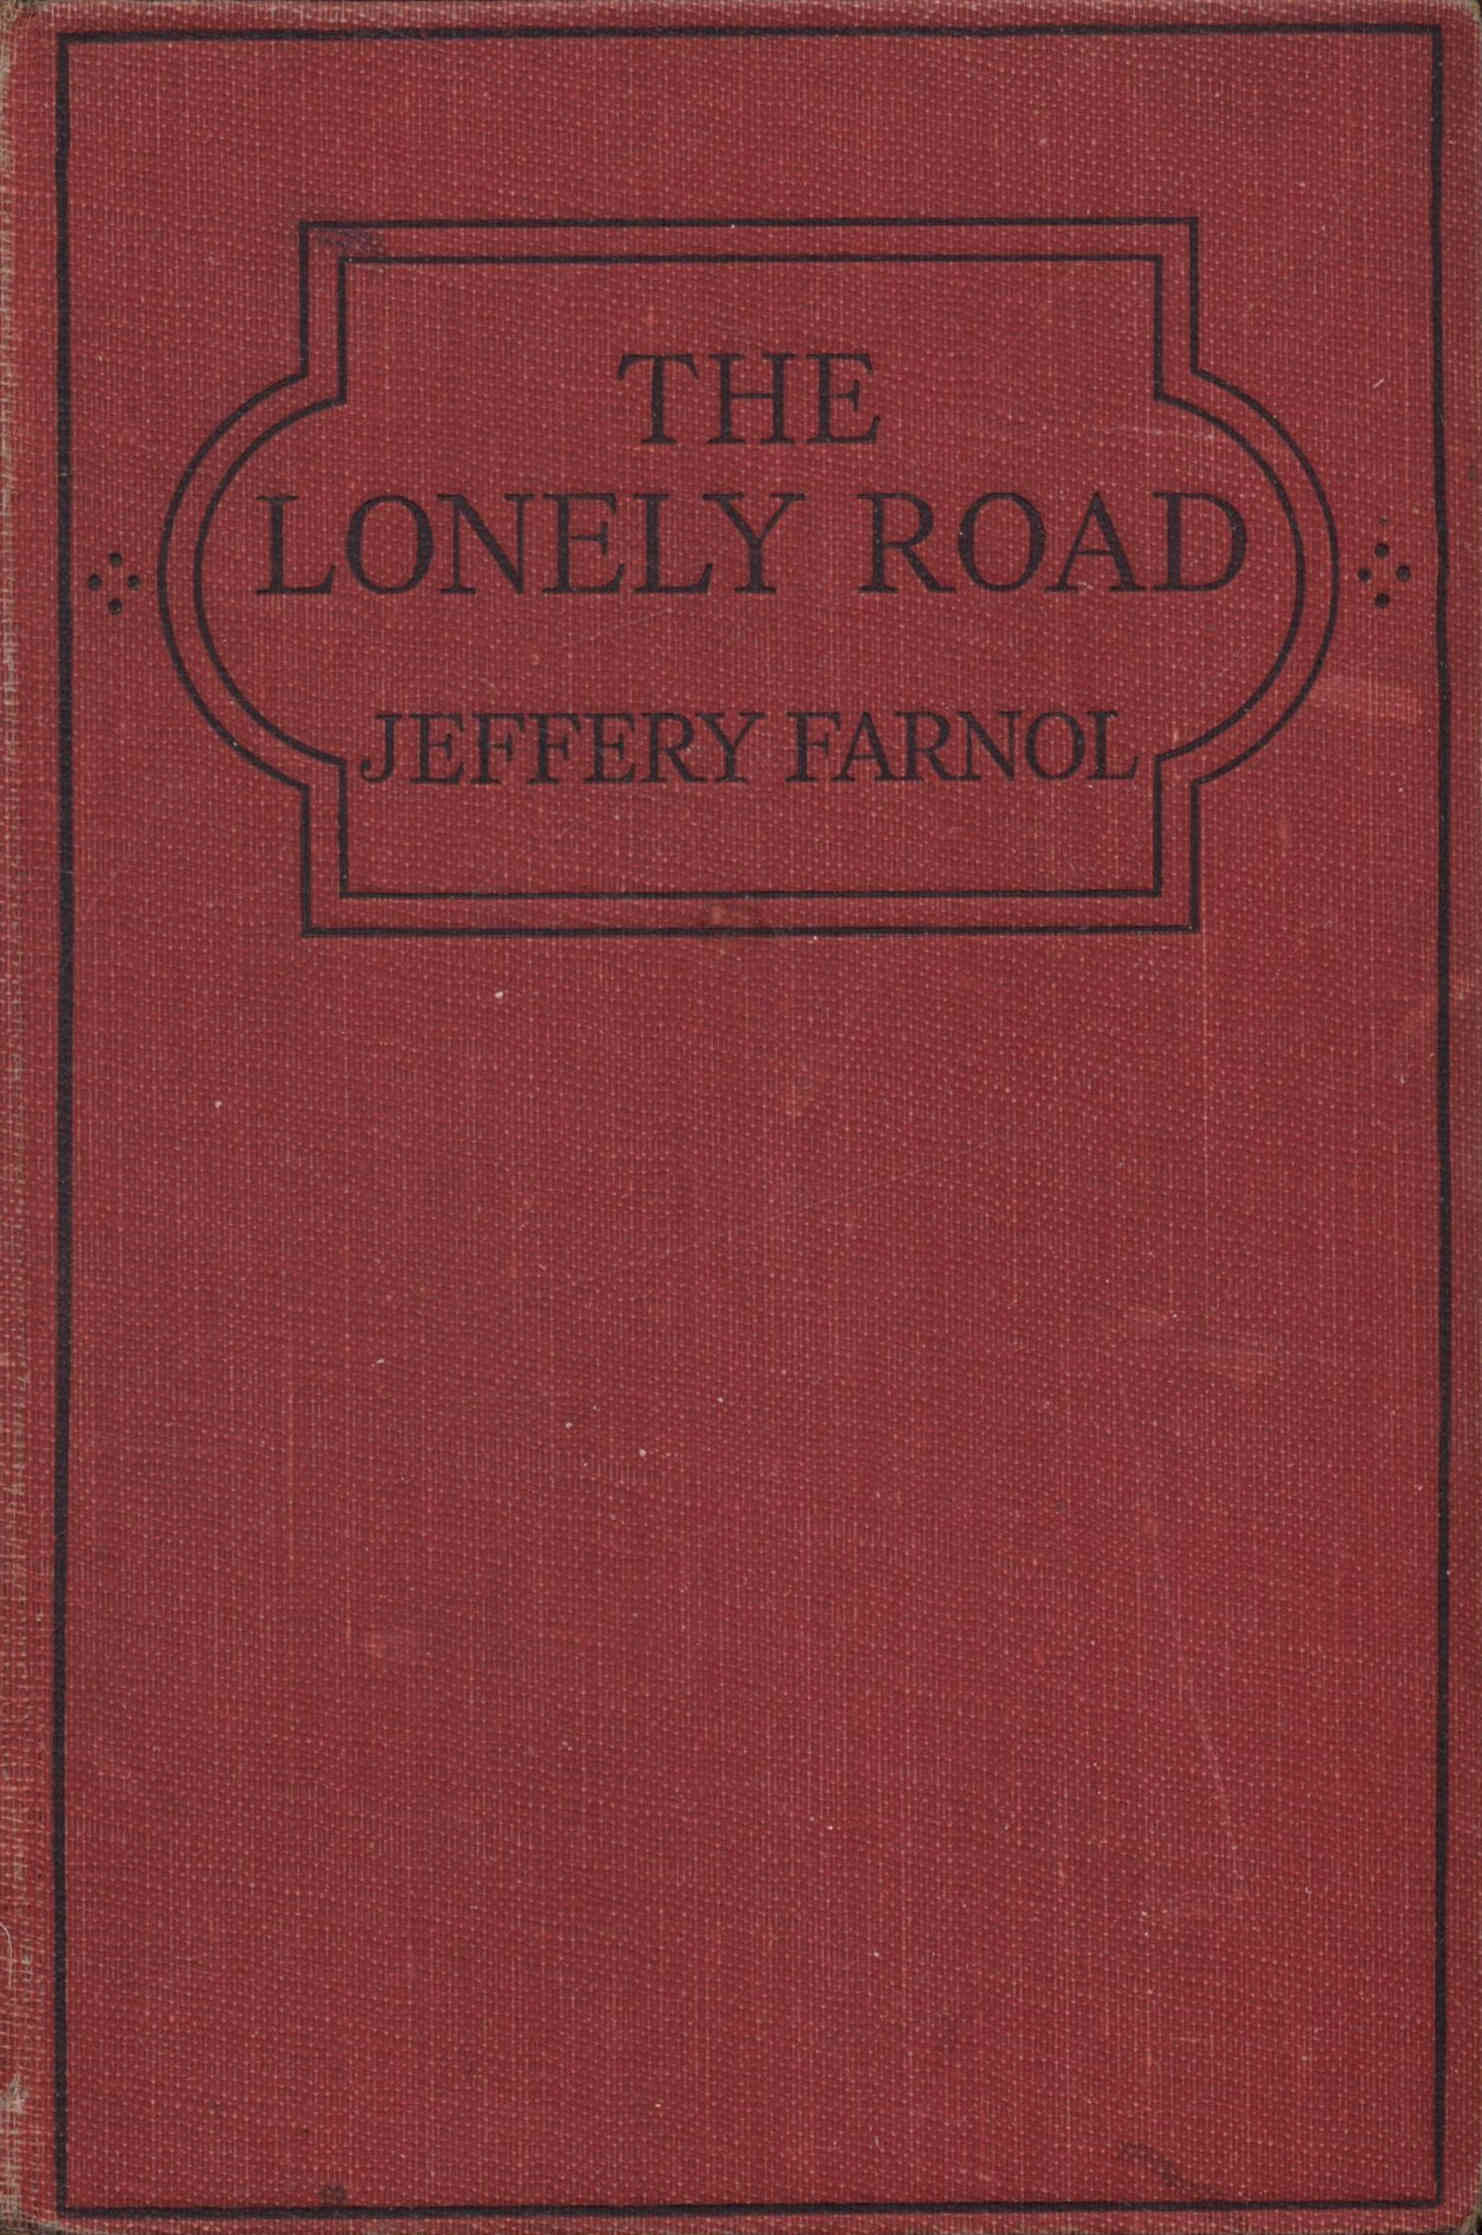 The Distributed Proofreaders Canada eBook of The Lonely Roadby Jeffery Farnol pic image